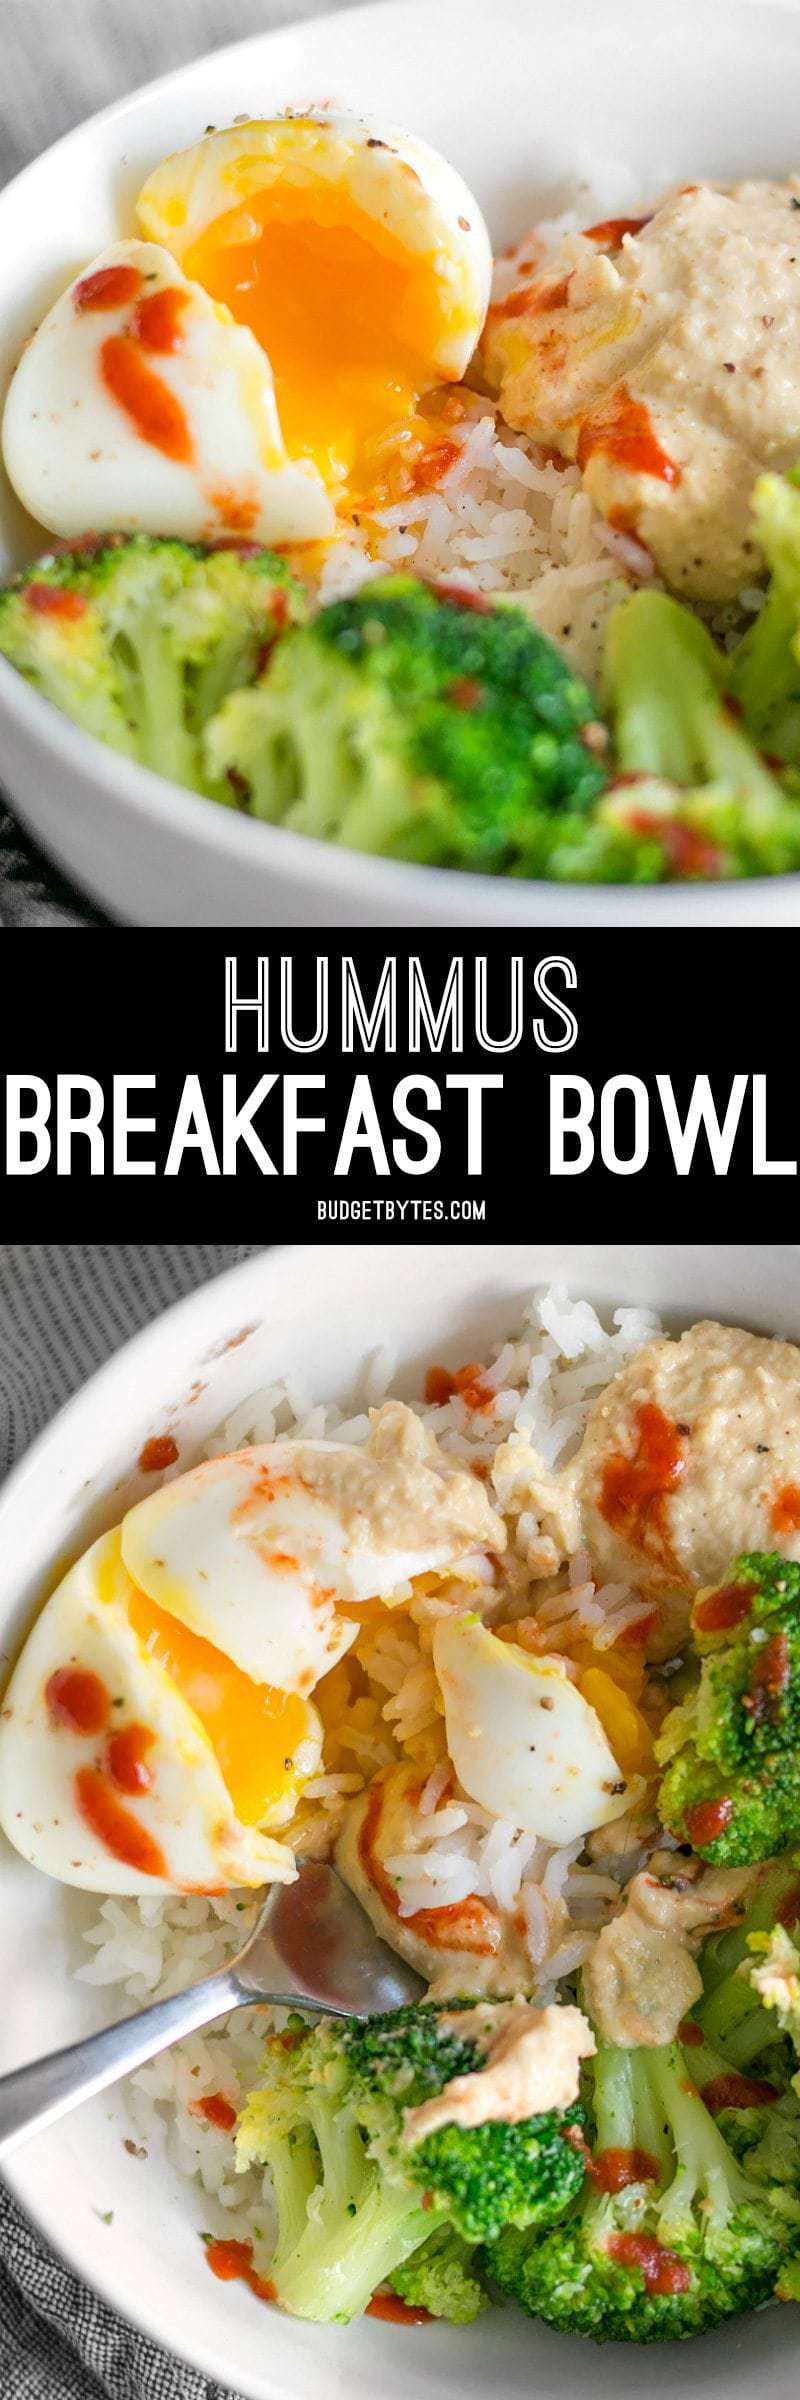 Hummus Breakfast Bowls are a savory, creamy medley of colors, flavors, and textures, plus a great way to work vegetables into the most important meal of the day. BudgetBytes.com